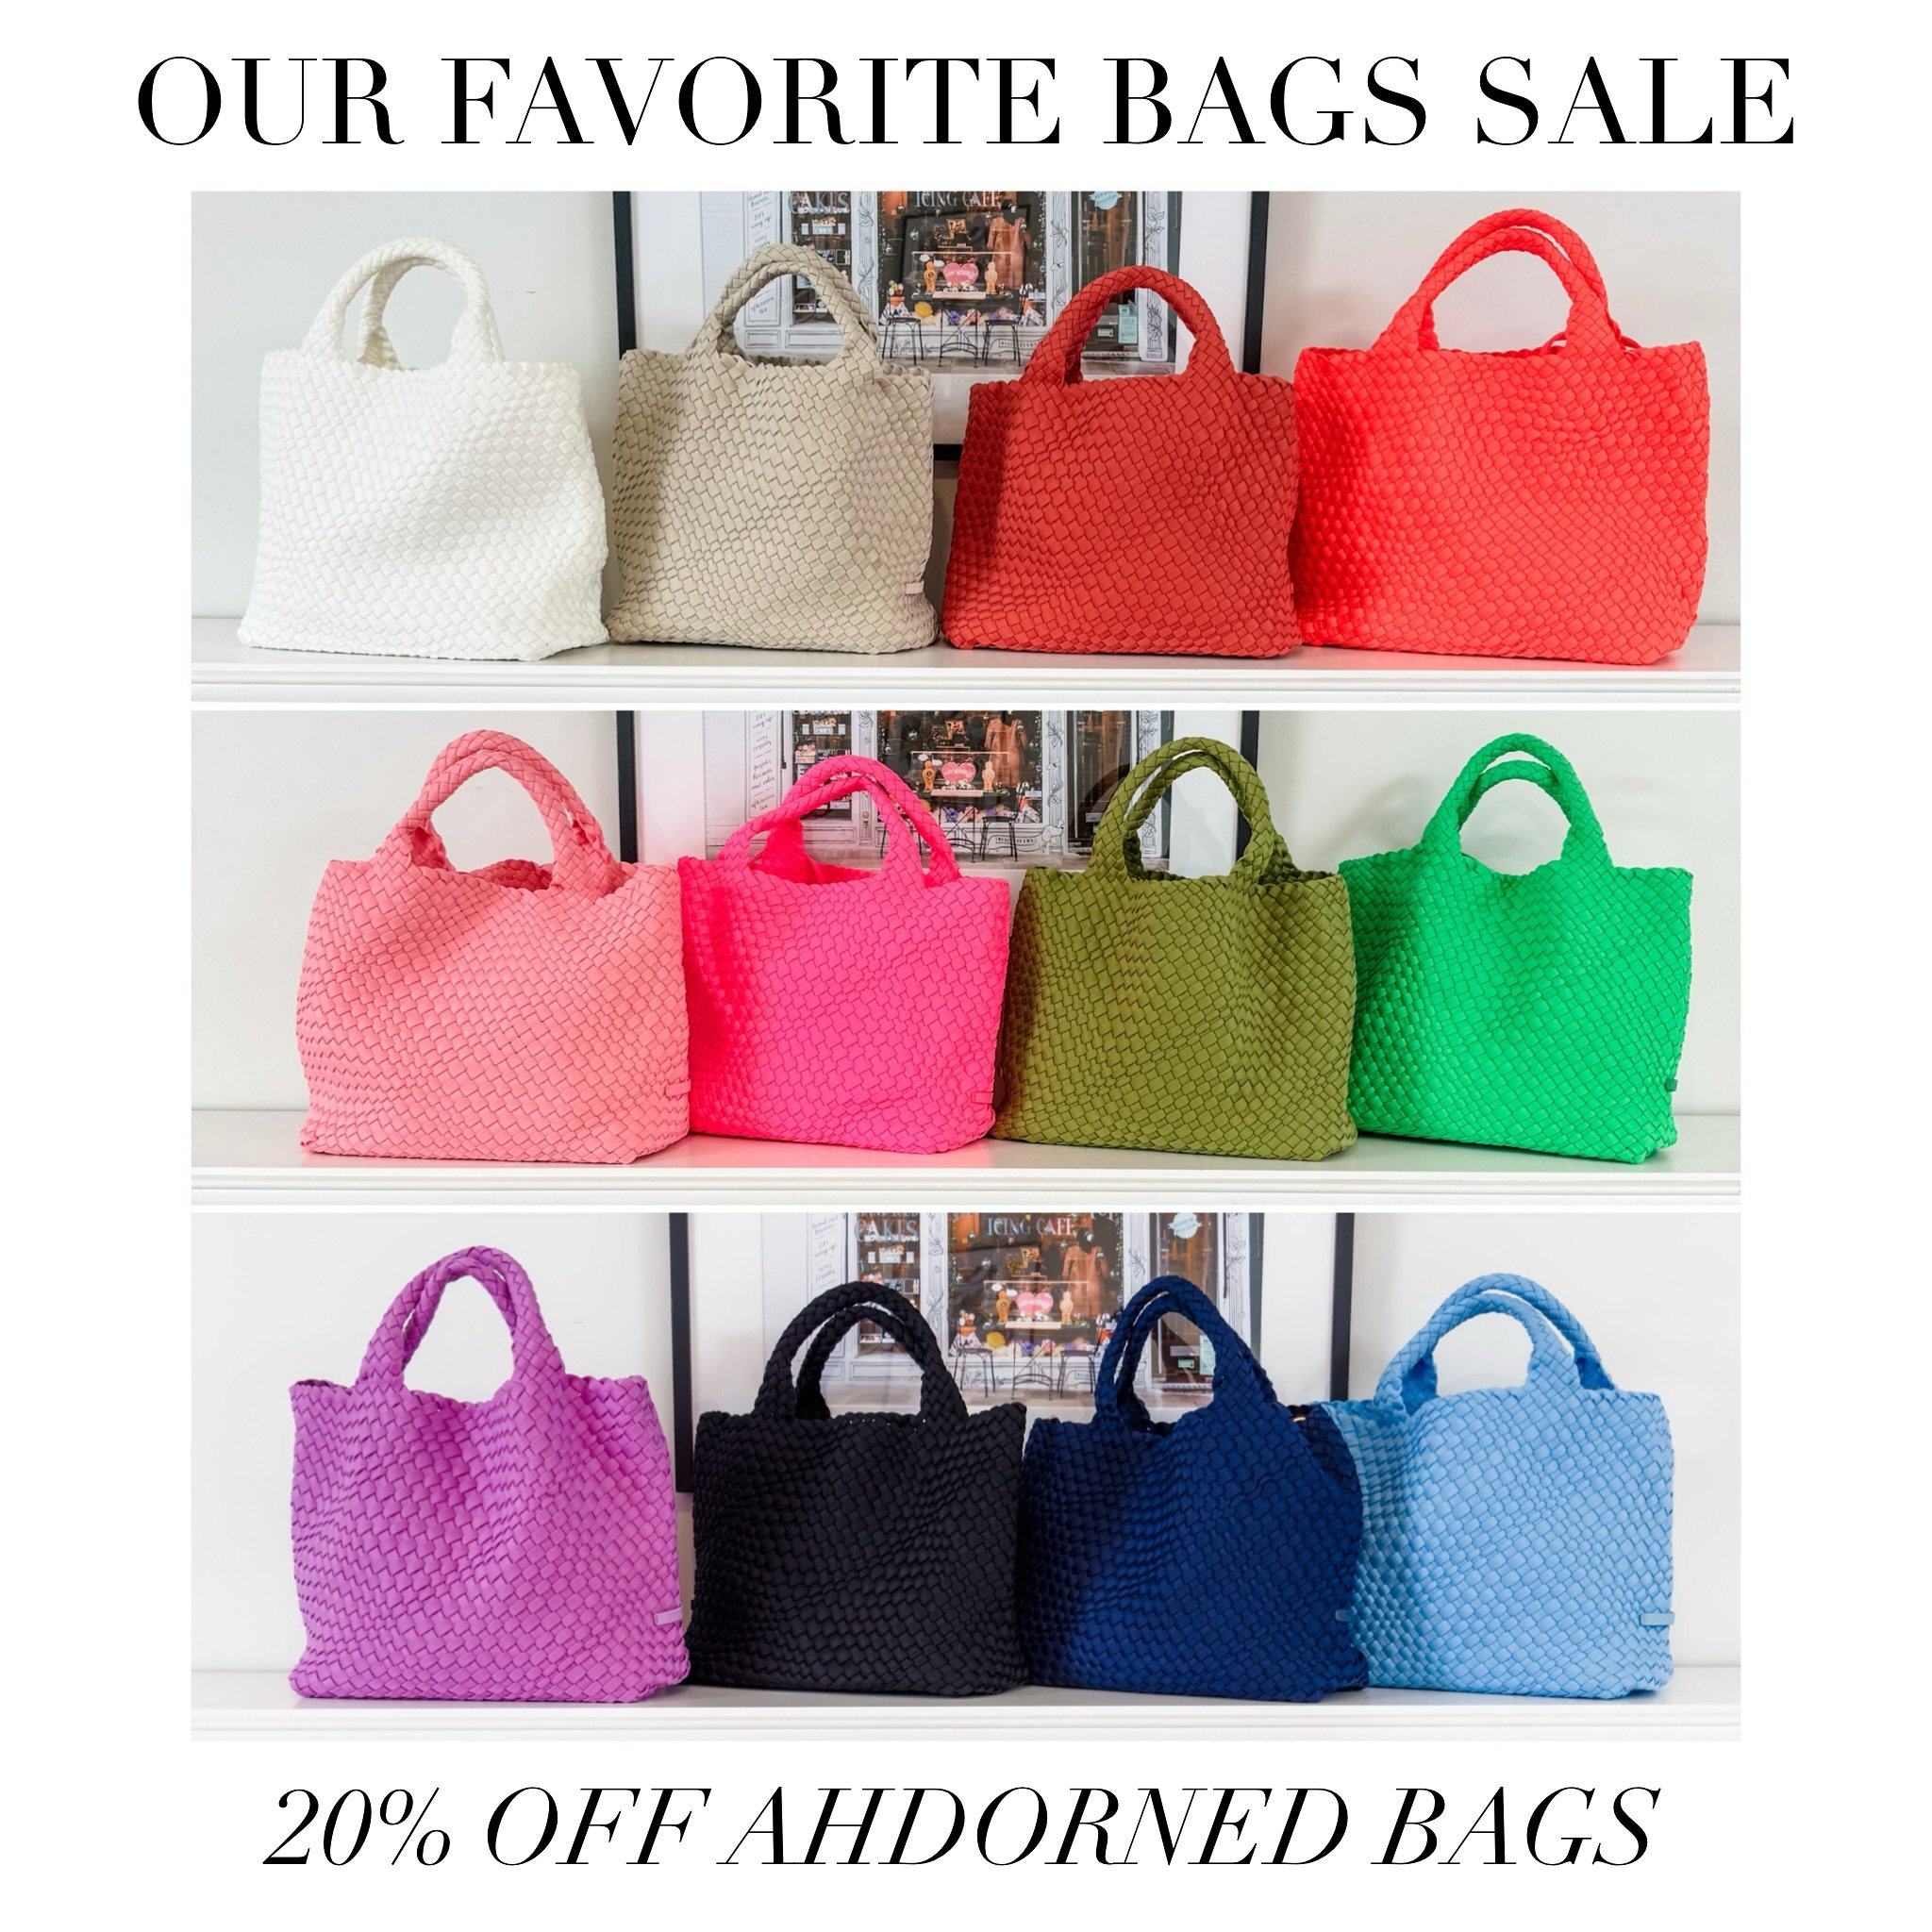 🎀 SALE for the MAMAs starts TODAY 🎀

20% OFF ALL AHDORNED BAGS AND STRAPS TODAY through MAY 15th!!